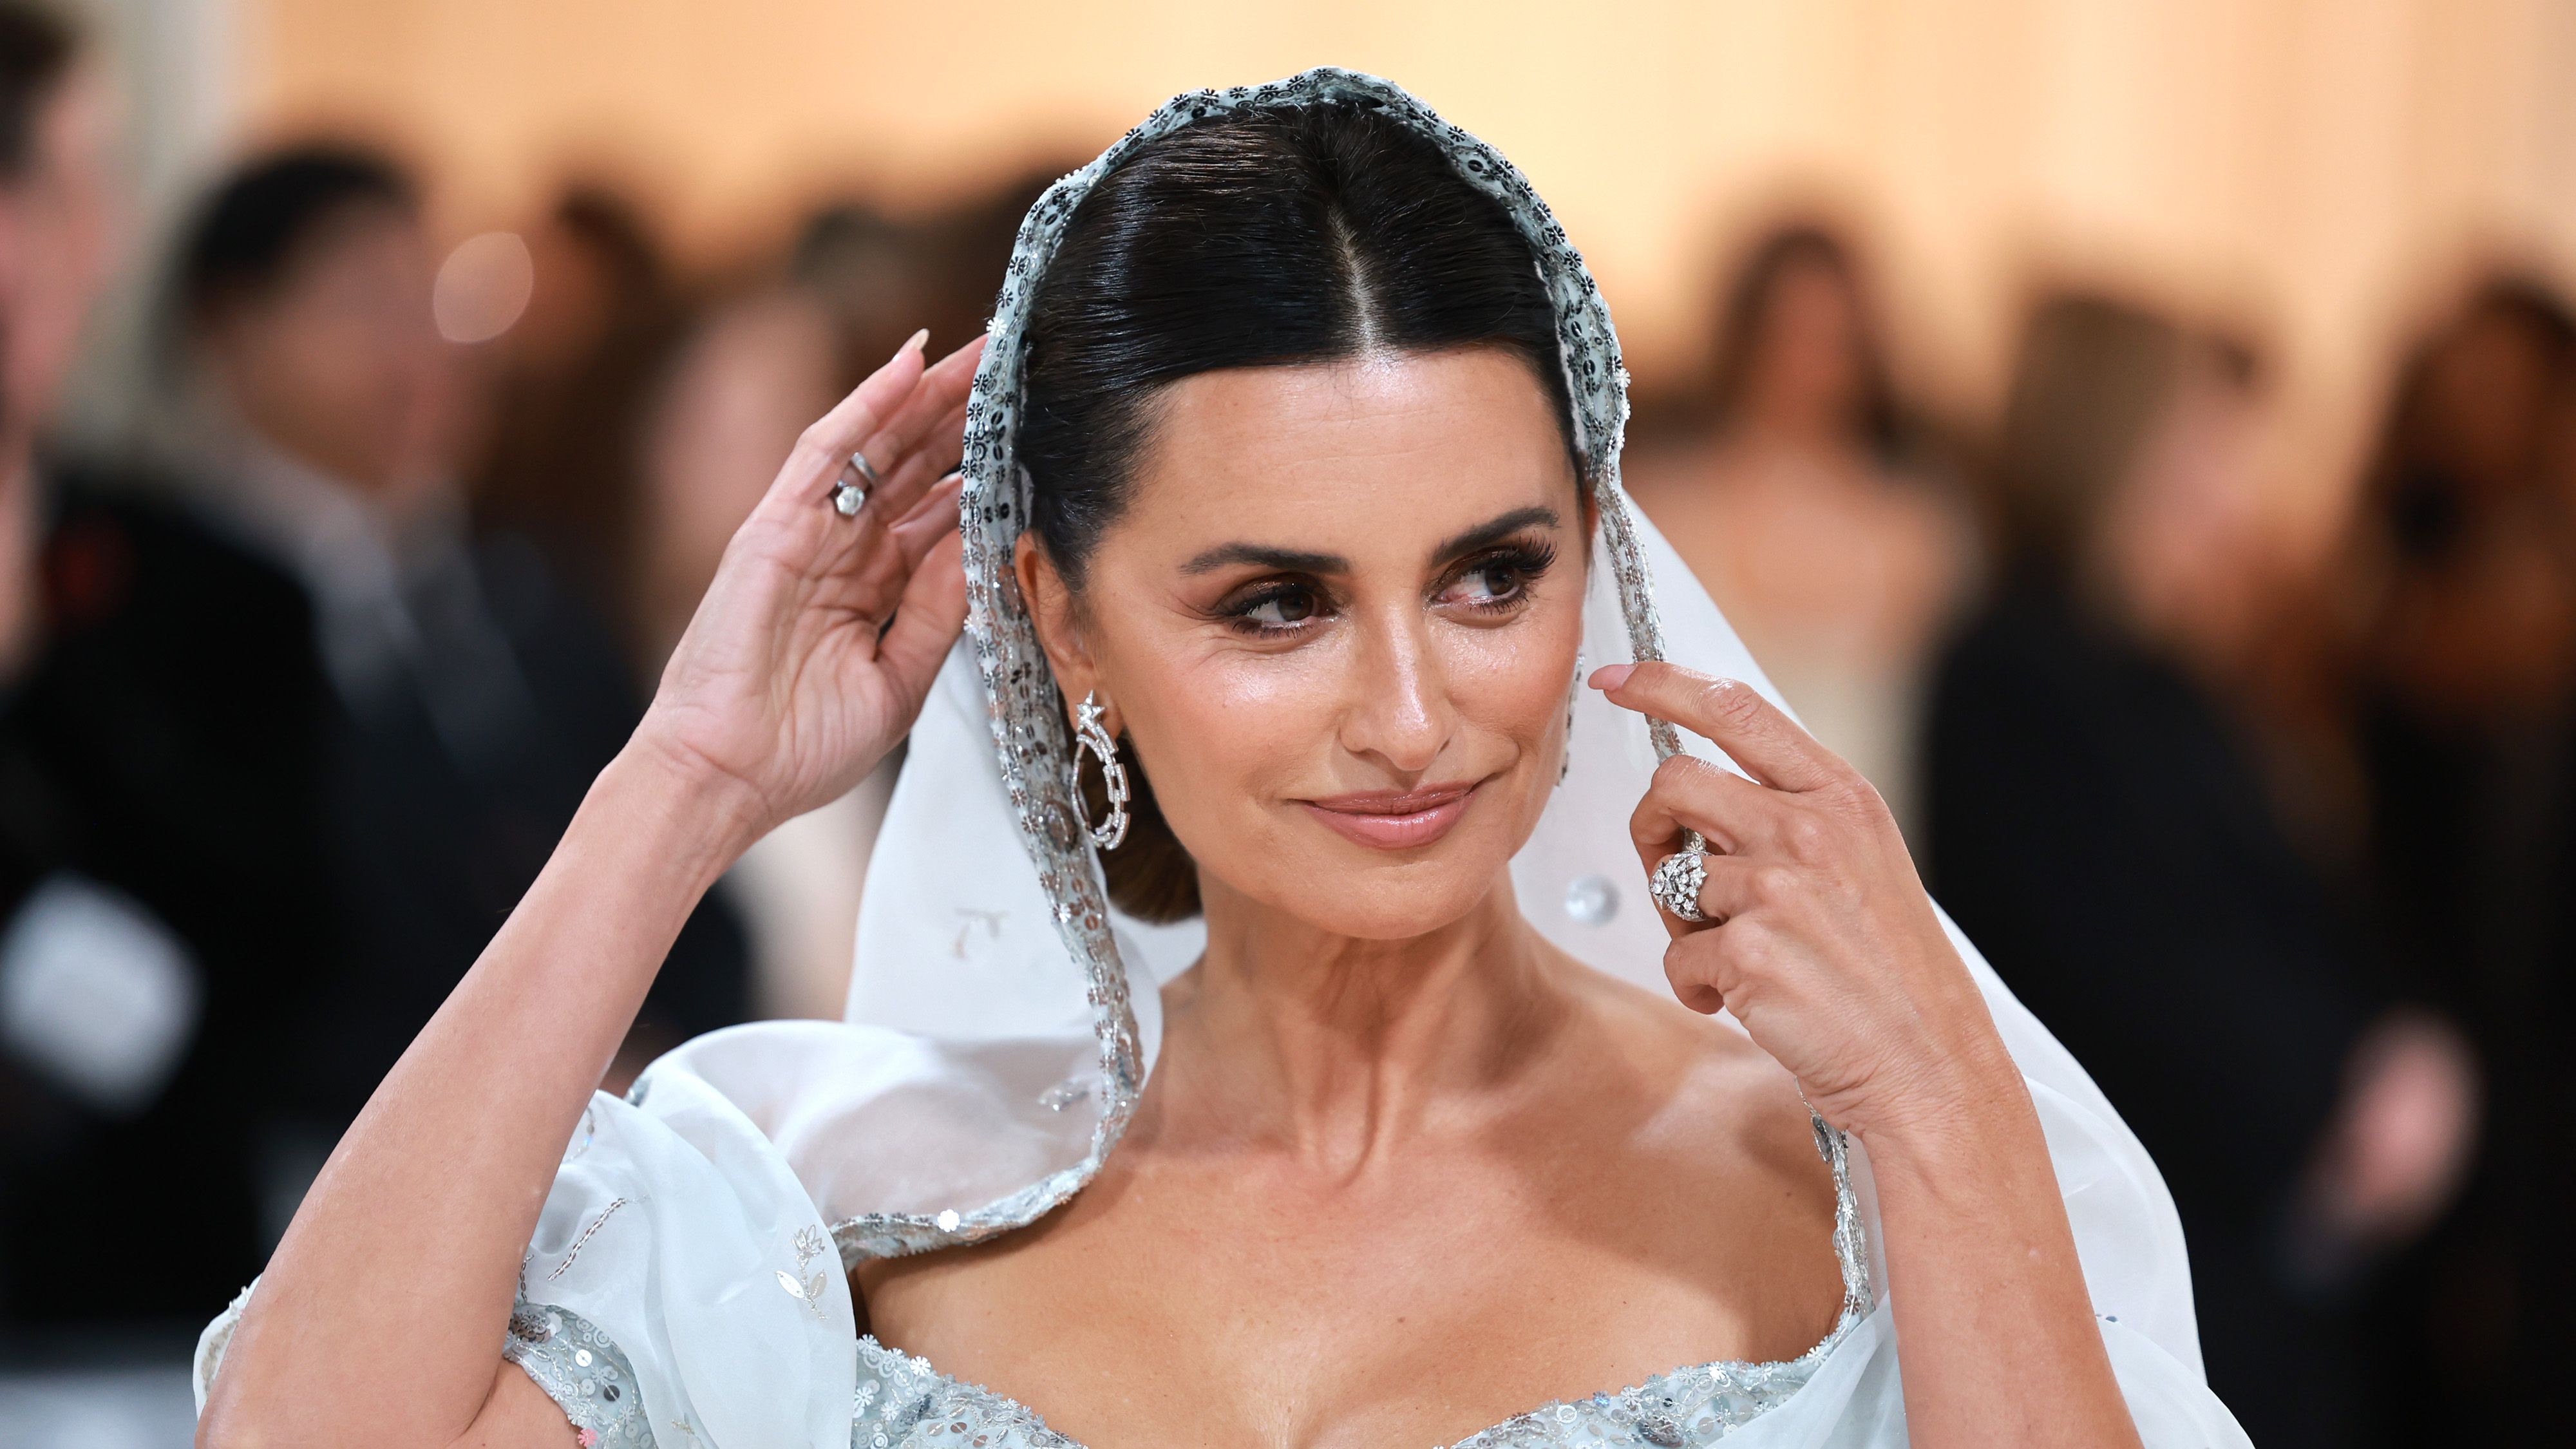 Penélope Cruz wears an ethereal gown at the Met Gala